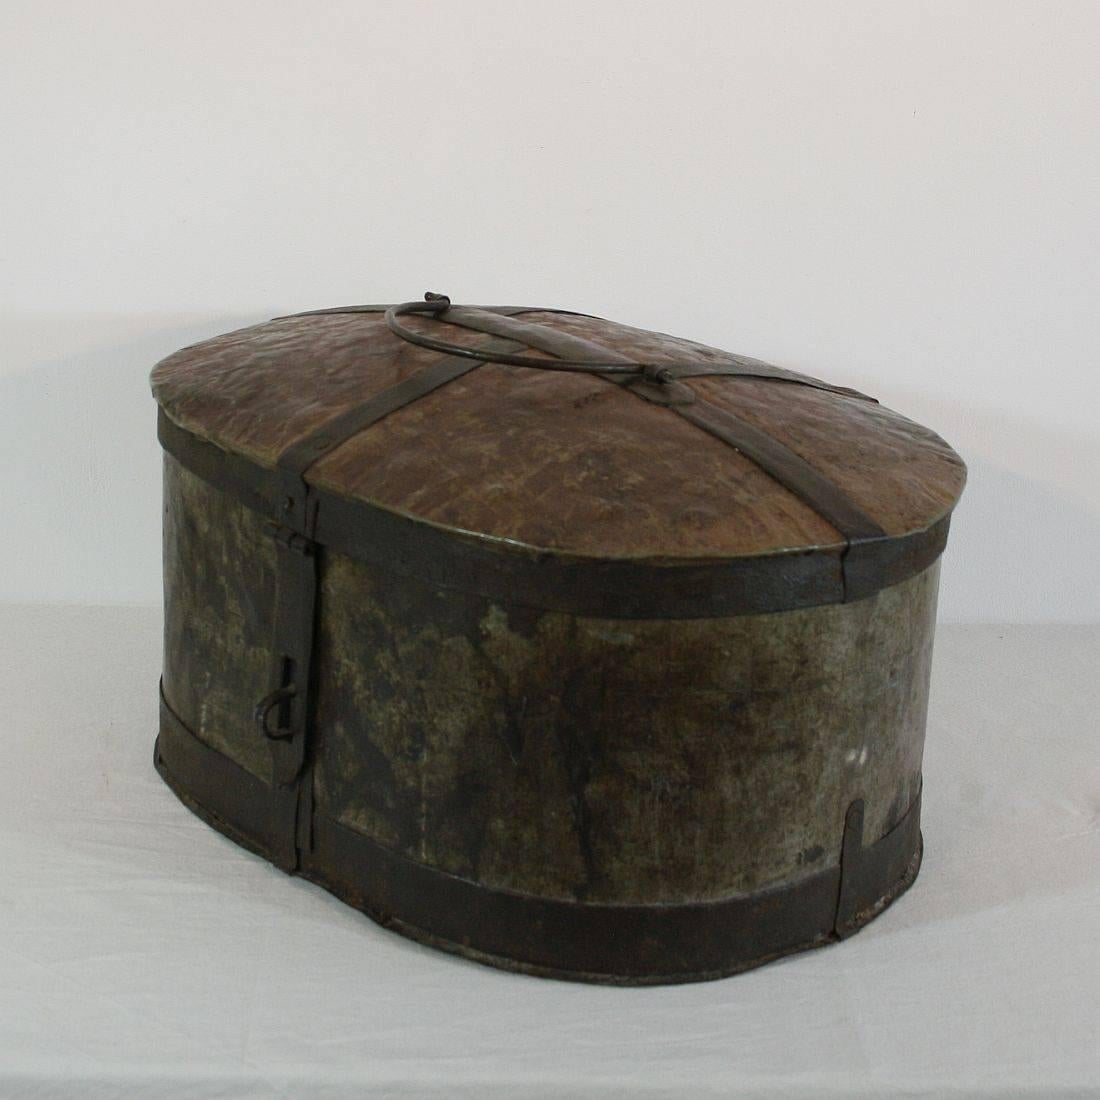 Unique Swedish travel box. The wooden versions are rare but in metal I have not seen it before. Great piece with beautiful worn patina, Sweden, circa 1750. Weathered.